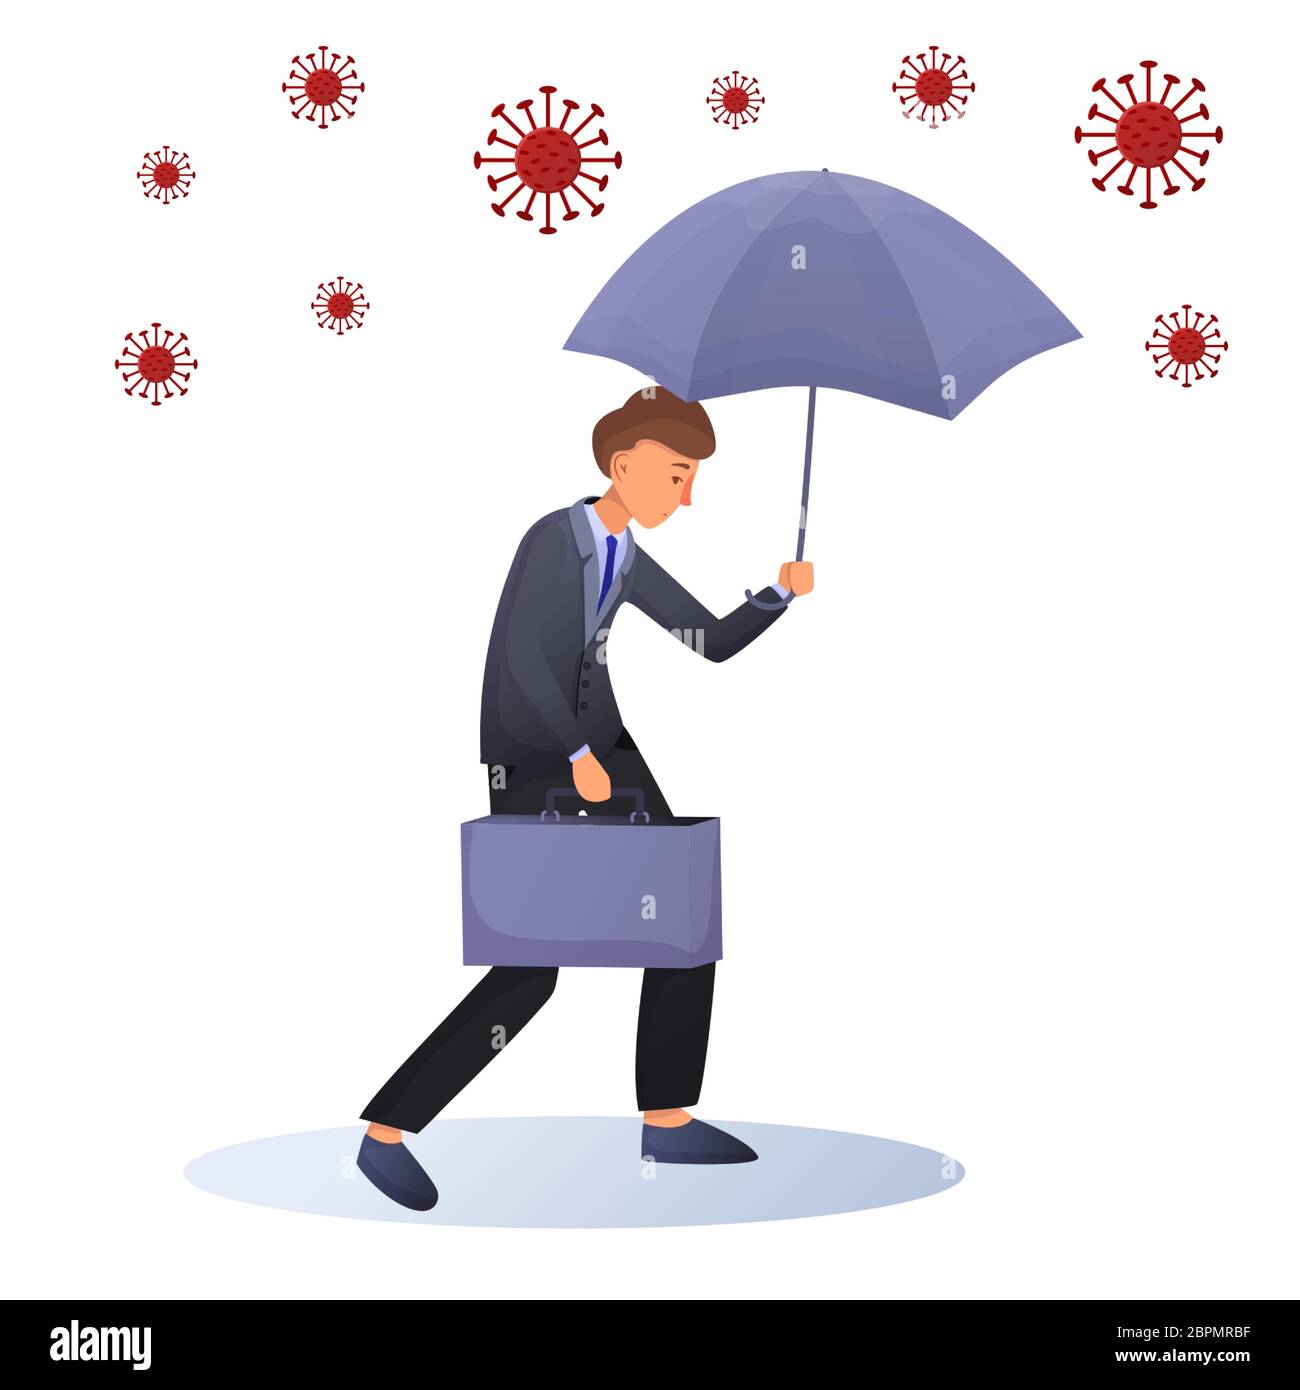 Bussinessman with suitcase under umbrella around viruses. Male cartoon character. Business concept. Virus pandemic. Stock Vector